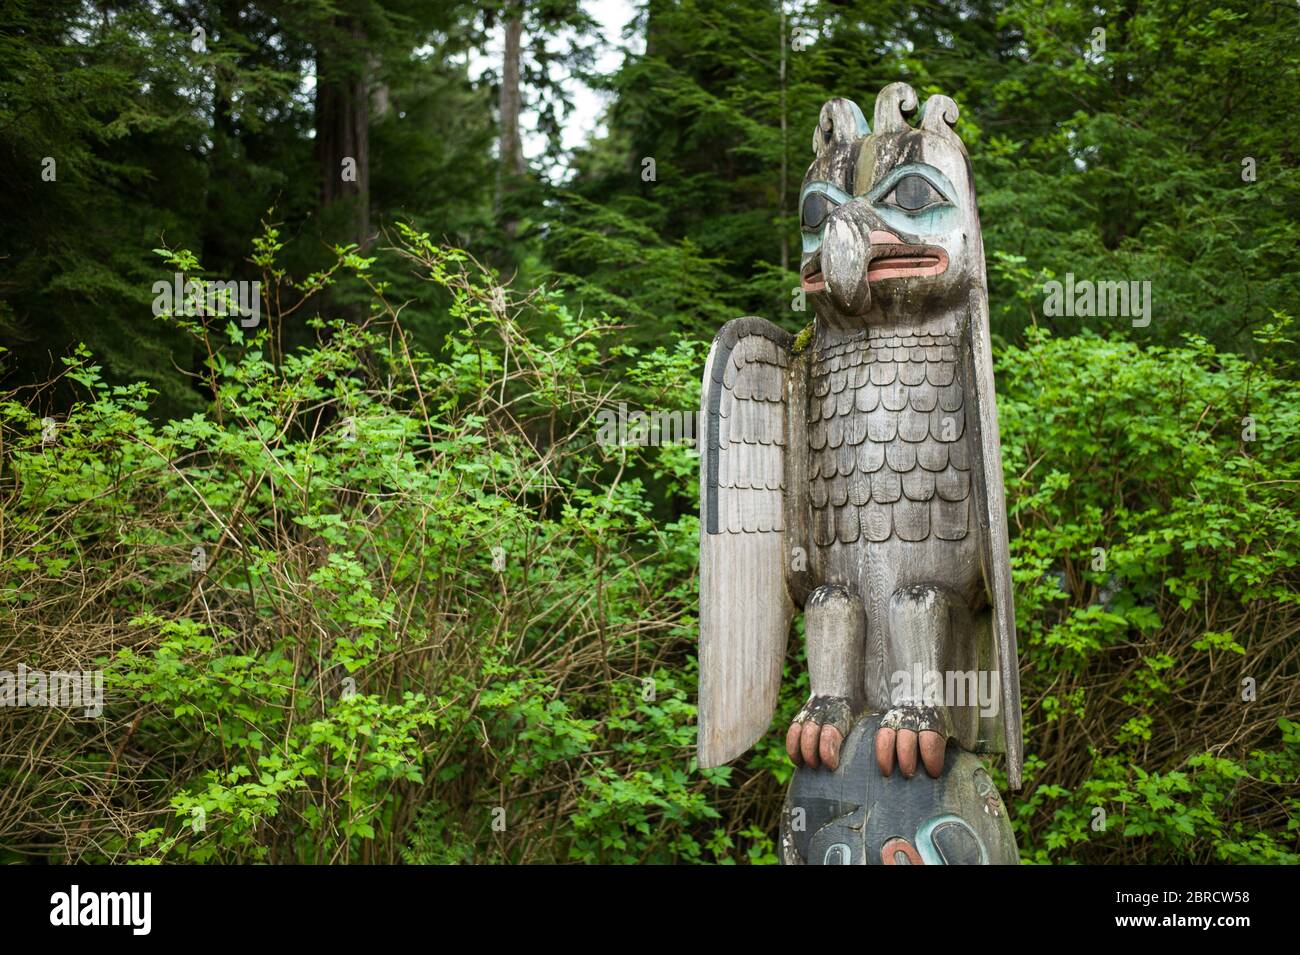 Totem Bight State Historical Park, Ketchikan, Alaska, USA, displays replica and restored Native American totem poles like Thunderbird and whale. Stock Photo